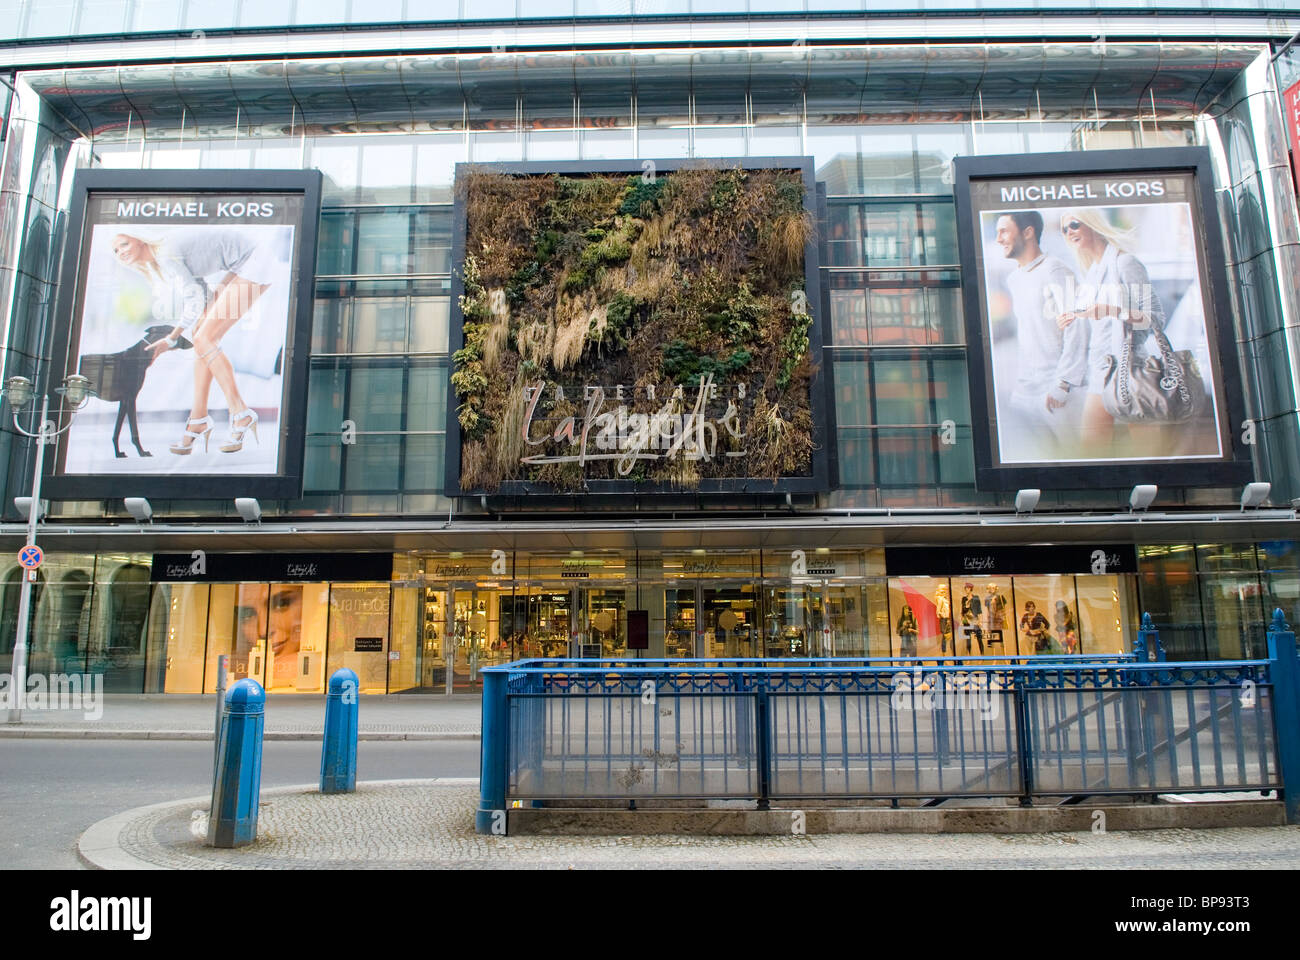 Galeris lafayette shopping mall building exterior Berlin city Germany Europe Stock Photo